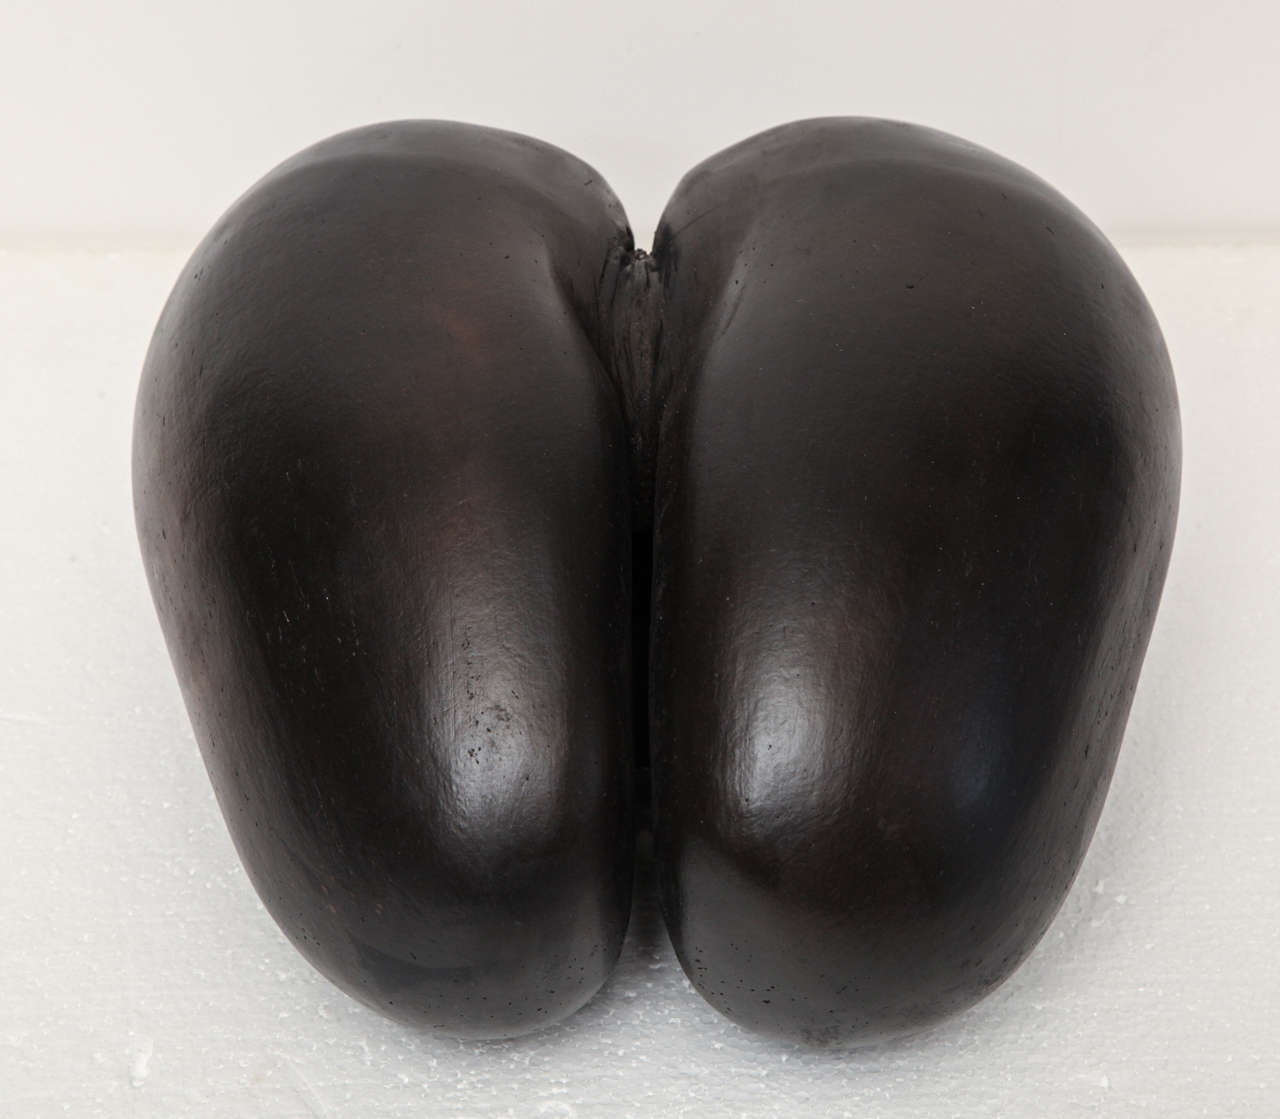 Coco de Mer, a Nut from the Seychelles